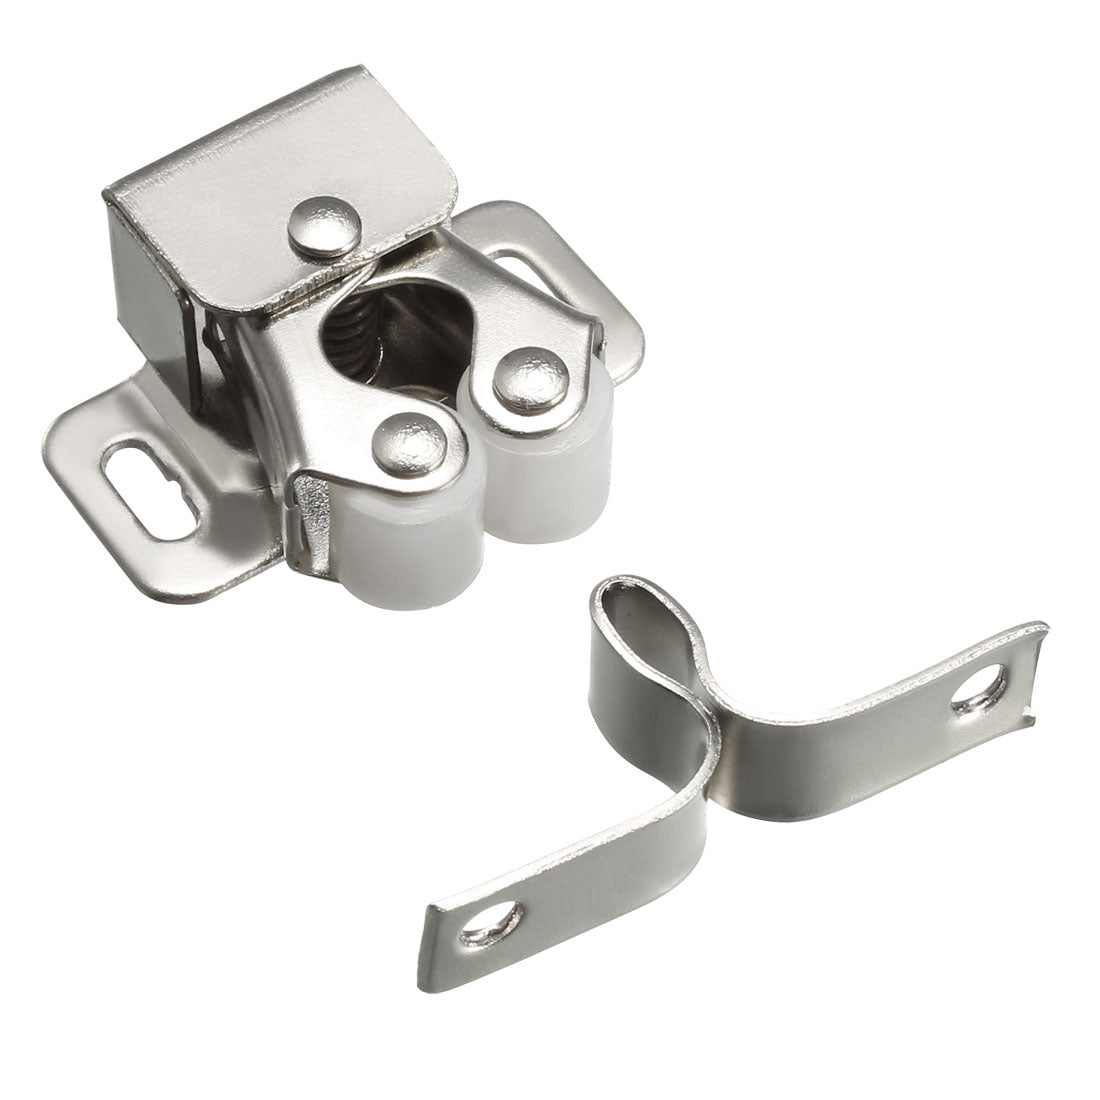 uxcell Uxcell Cabinet Door Double Roller Catch Ball Latch with Prong Hardware, Silver 5pcs